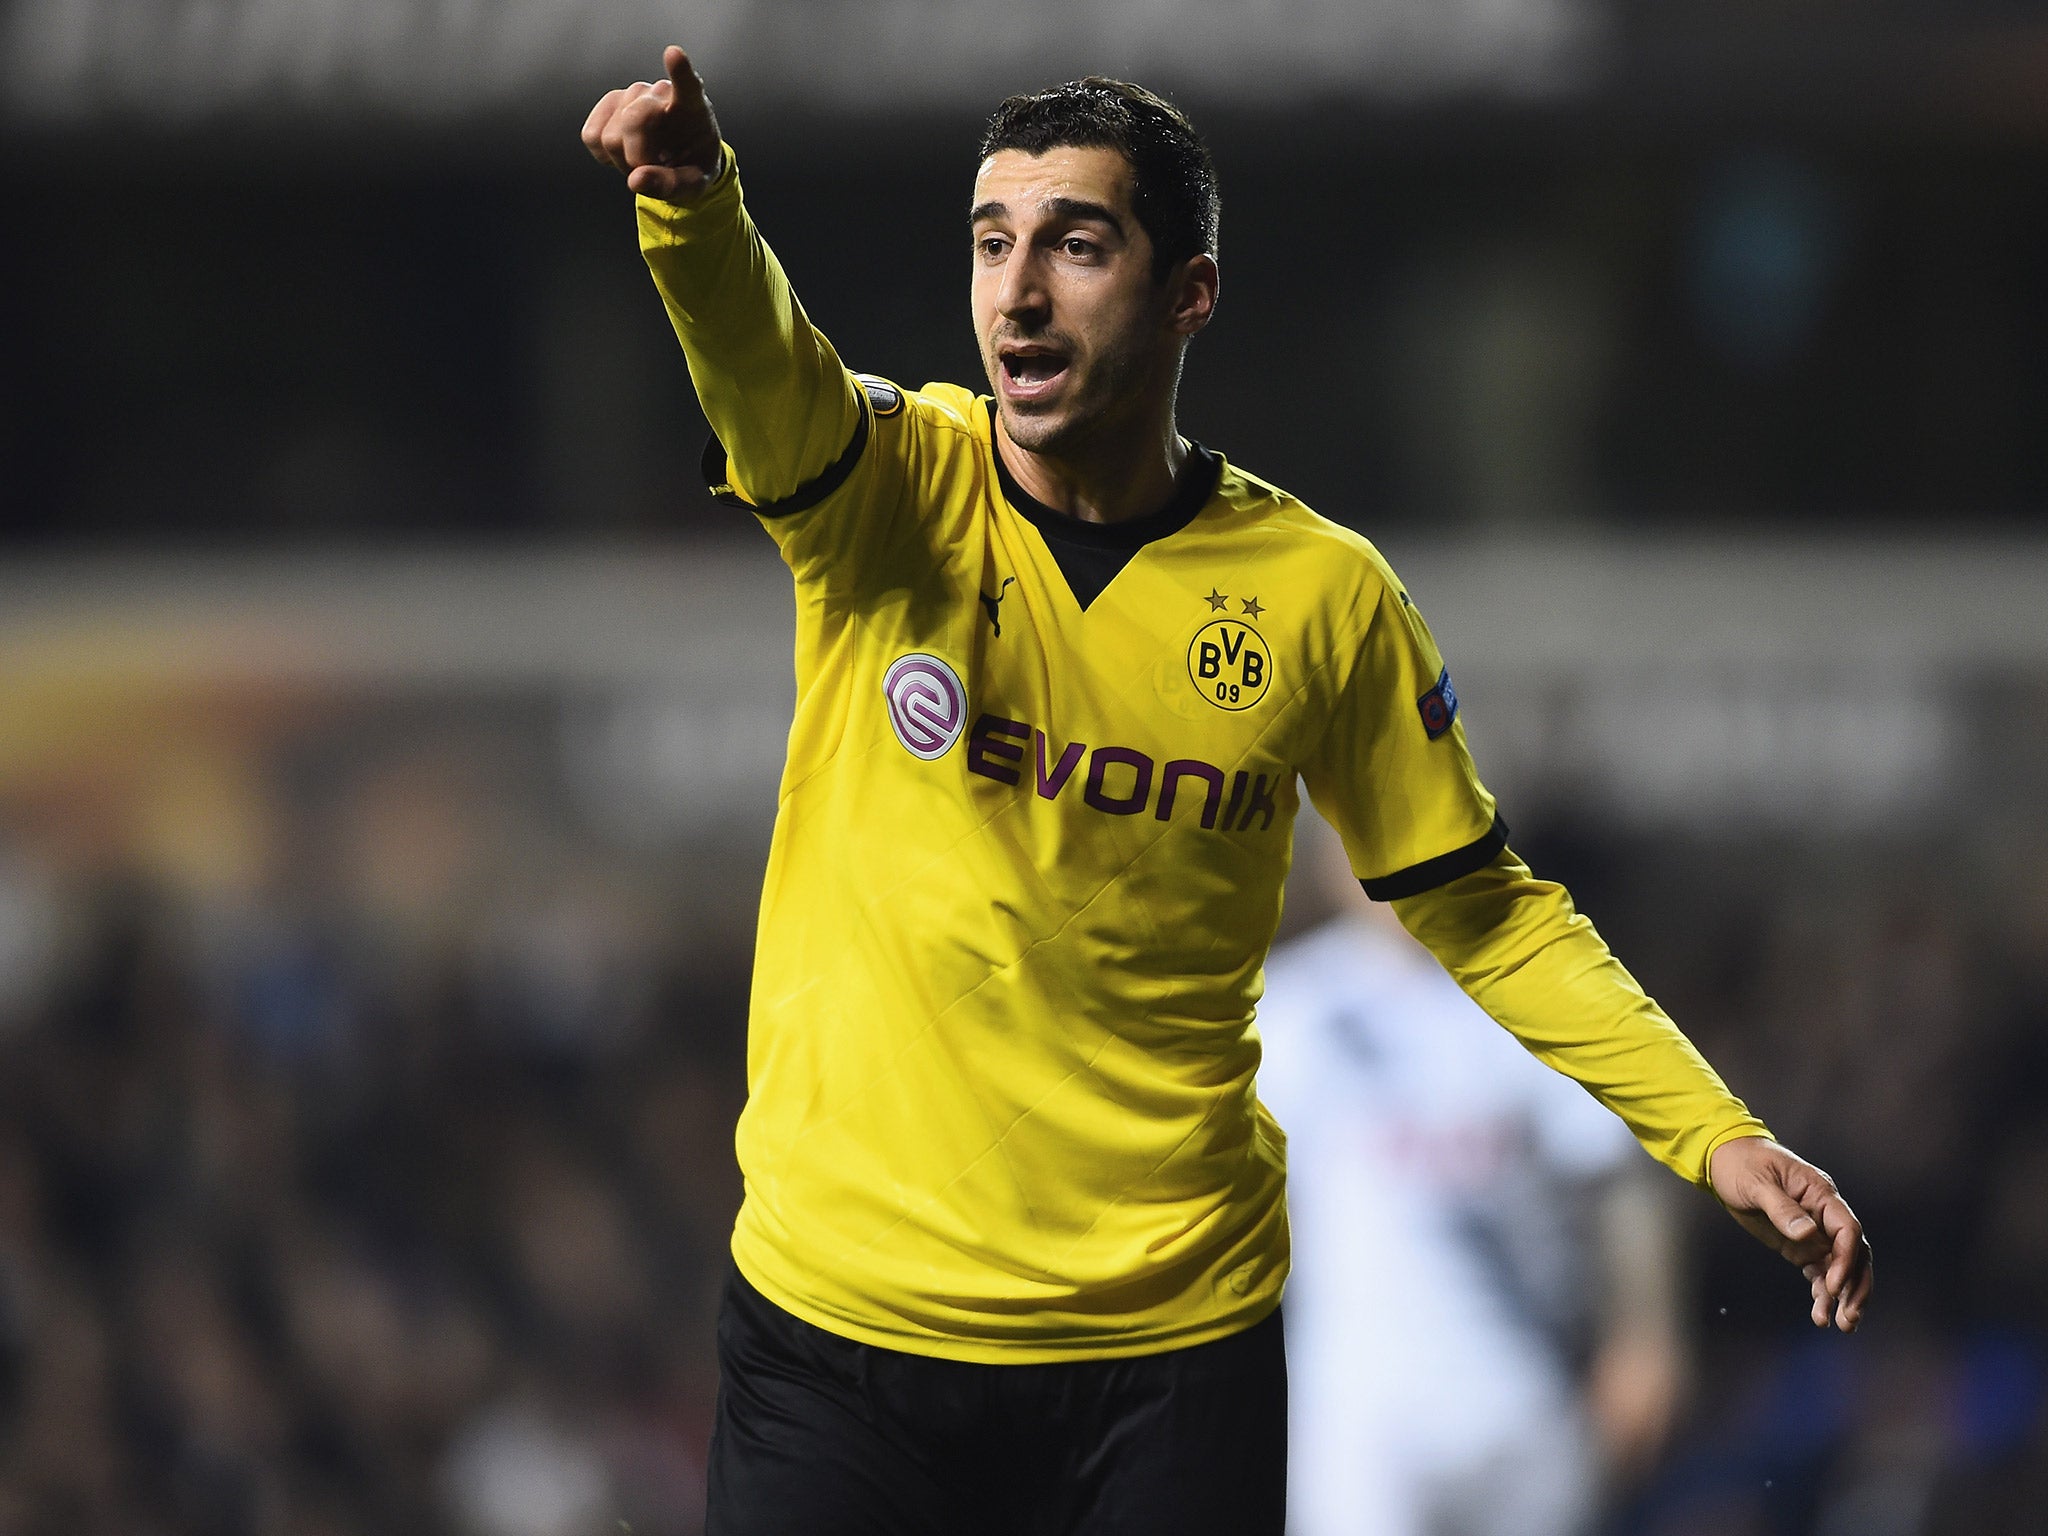 Henrikh Mkhitaryan is available for £25m with both Arsenal and Manchester United interested